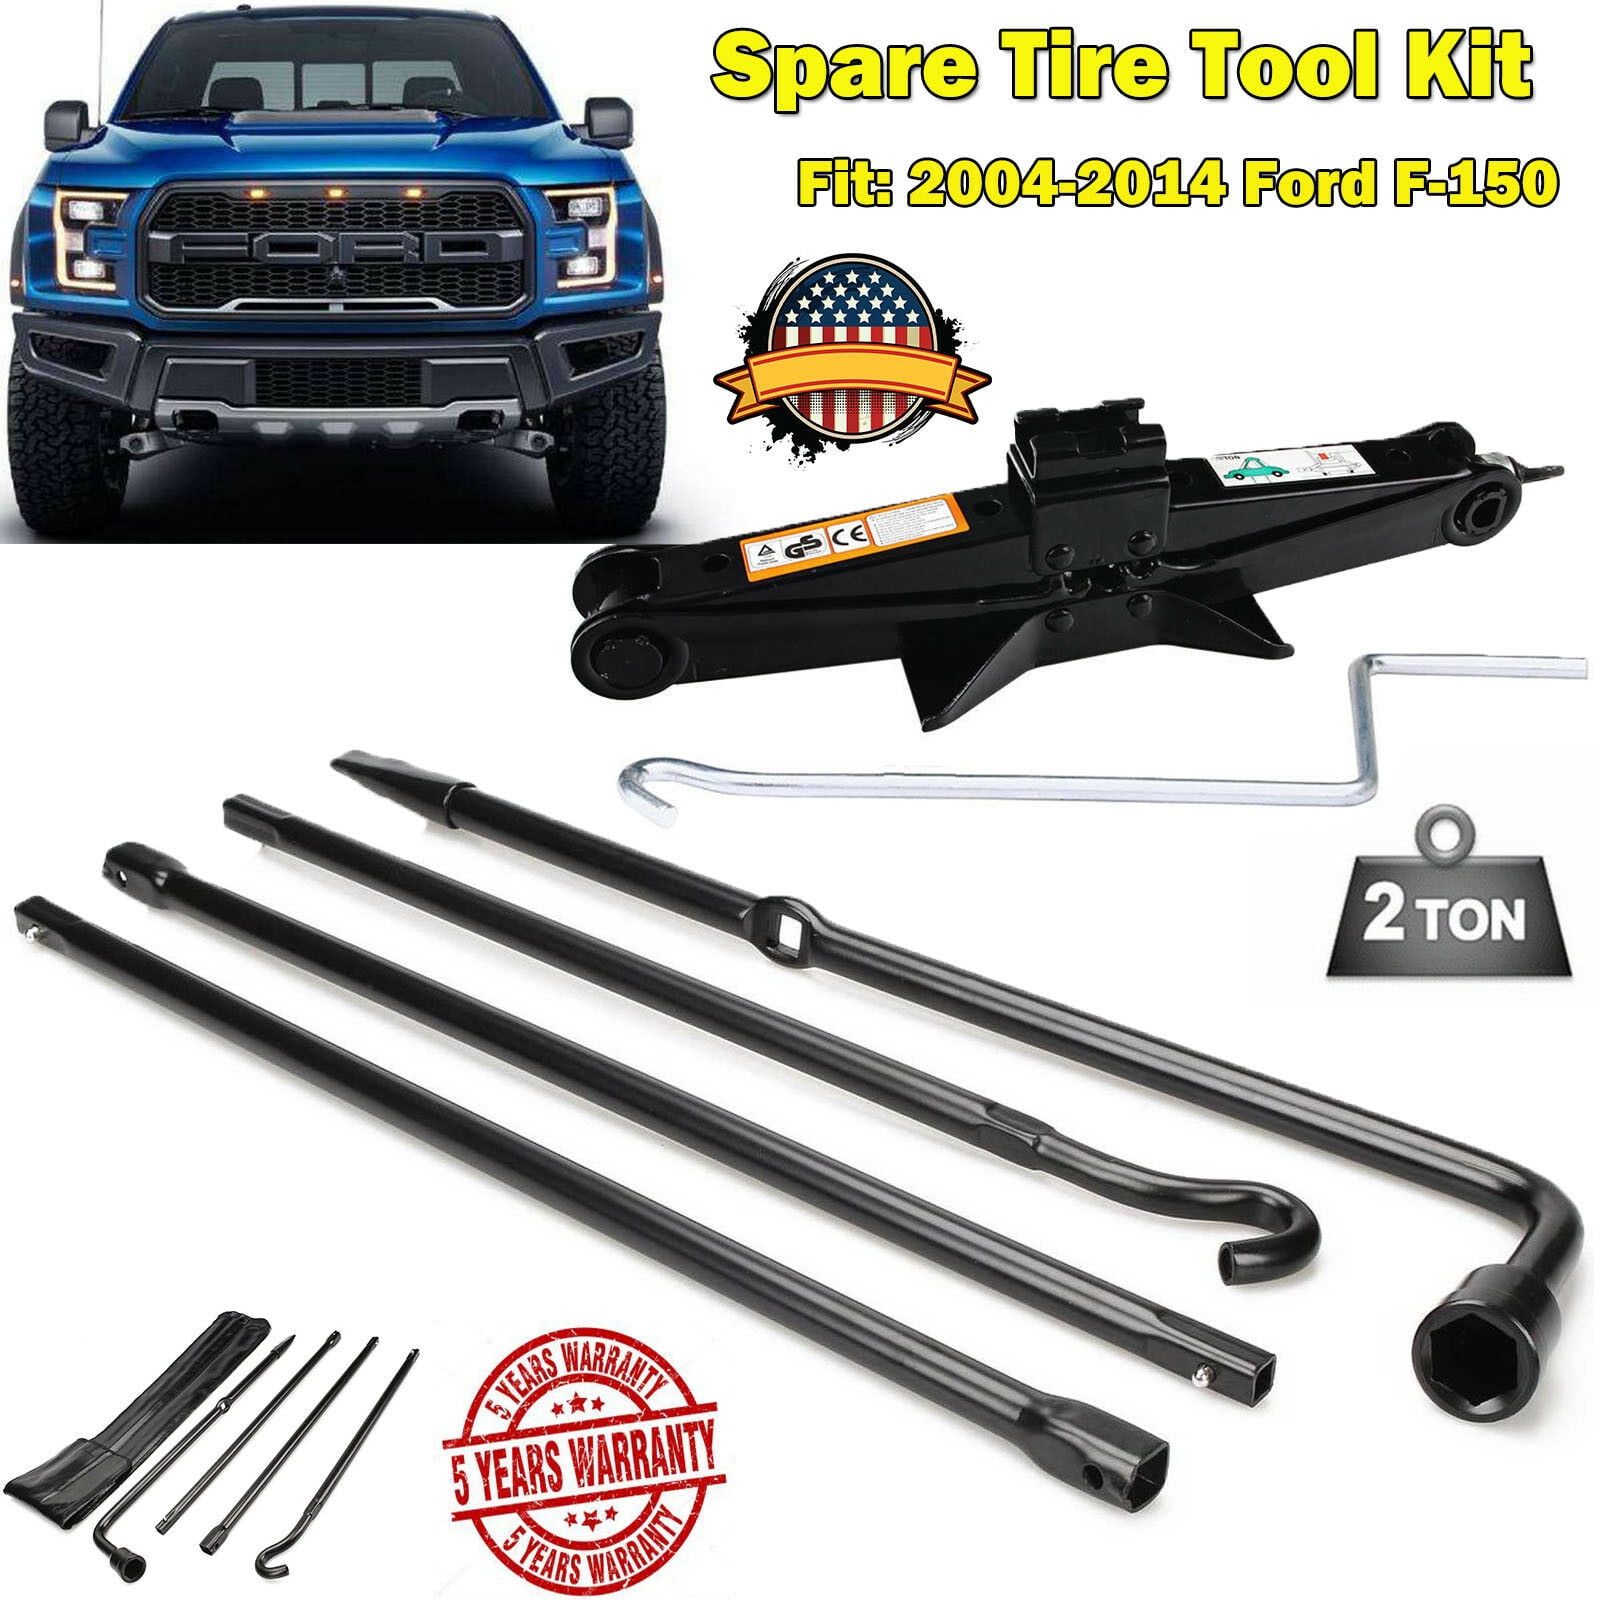 2004-2014 For Ford F150 Spare Tire Lug Wrench Tool Kit Replacement & Scissor Jack 2 Tonne Heavy Duty 